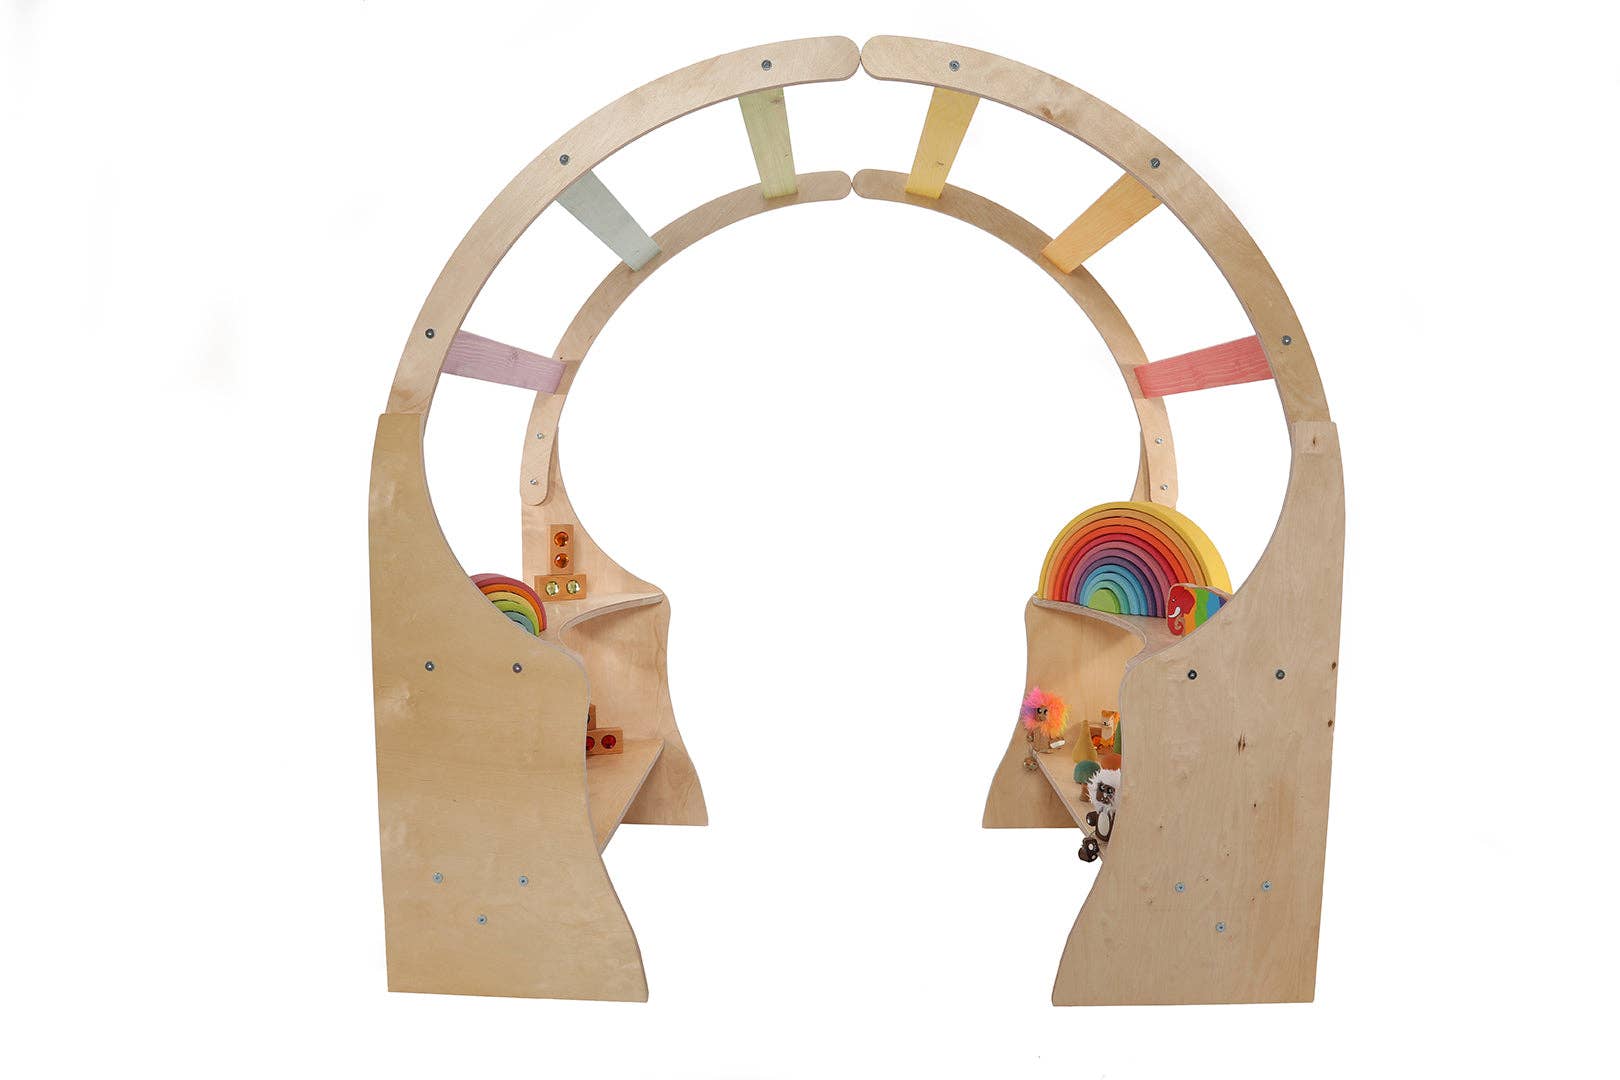 Wooden numbers - Woodinout © wooden Montessori toys